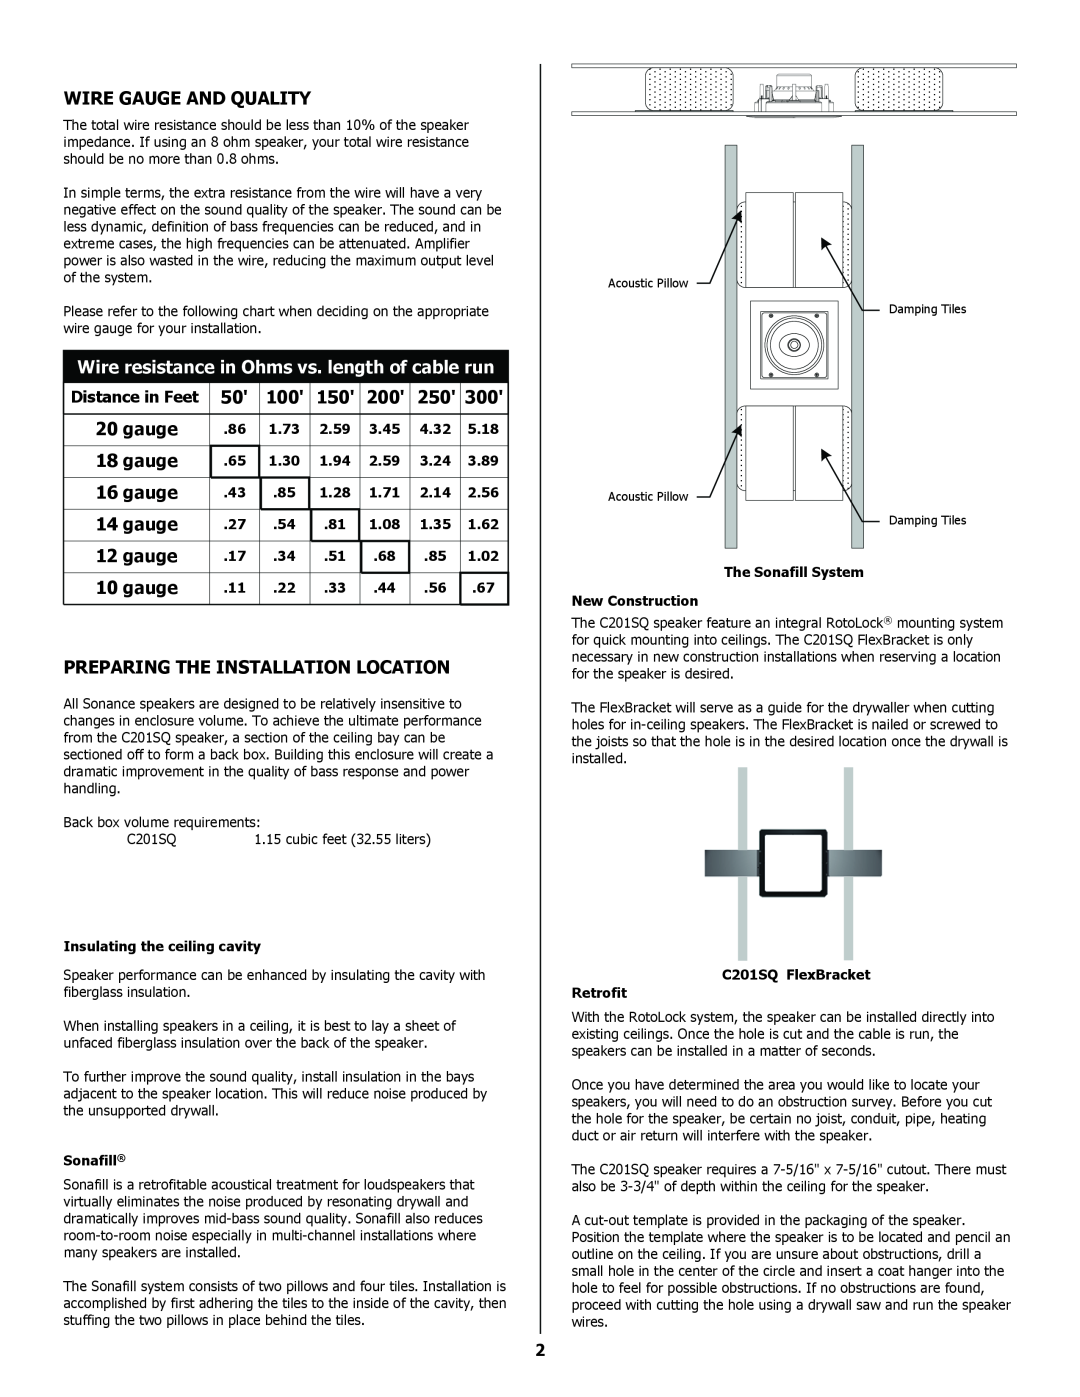 Sonance C2015Q installation instructions Wire Gauge And Quality, Wire resistance in Ohms vs. length of cable run 